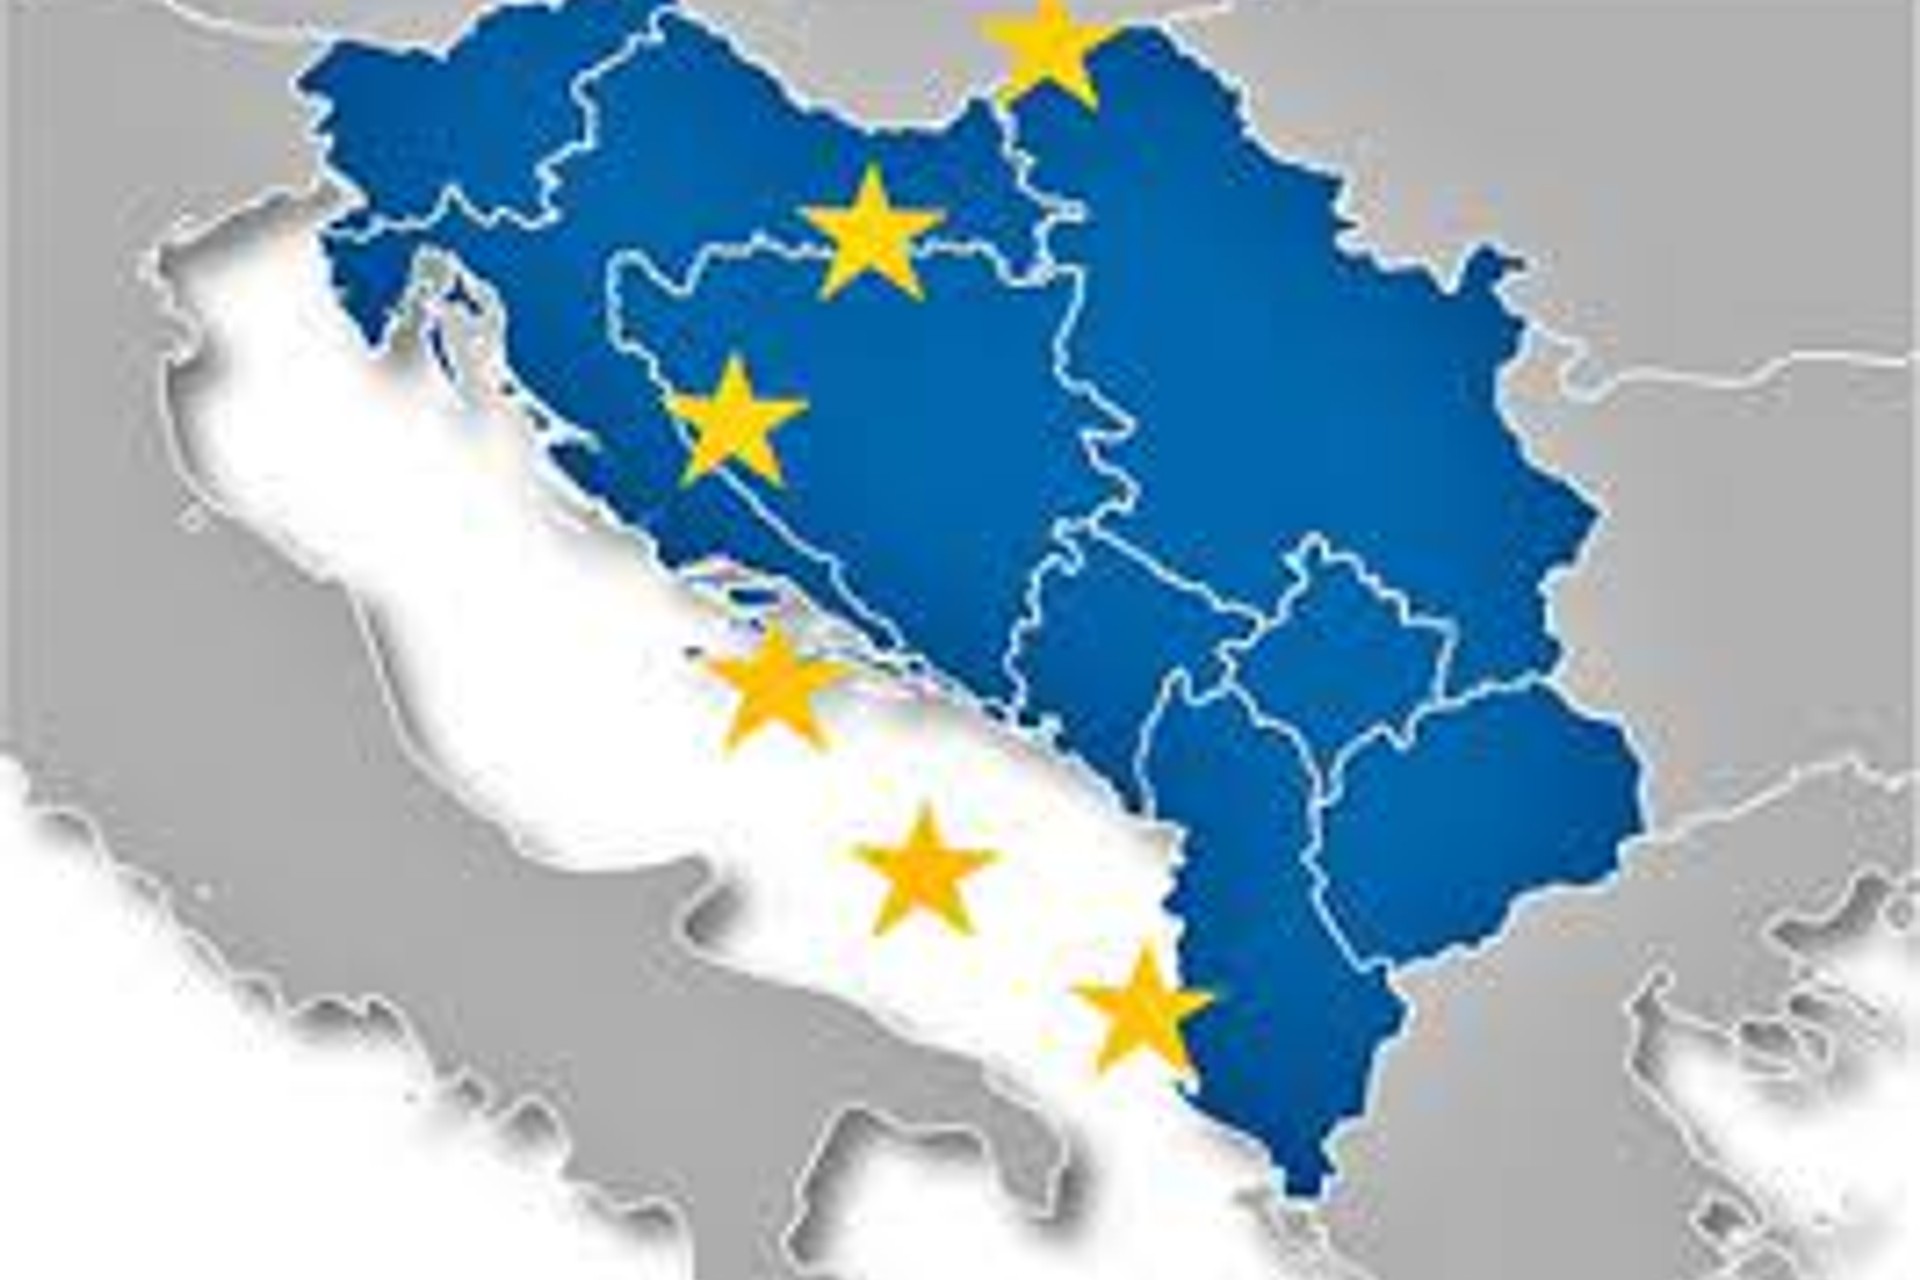 THE WESTERN BALKANS: ANCHORED IN THE PAST OR MOVING FORWARD TOWARDS A EUROPEAN FUTURE